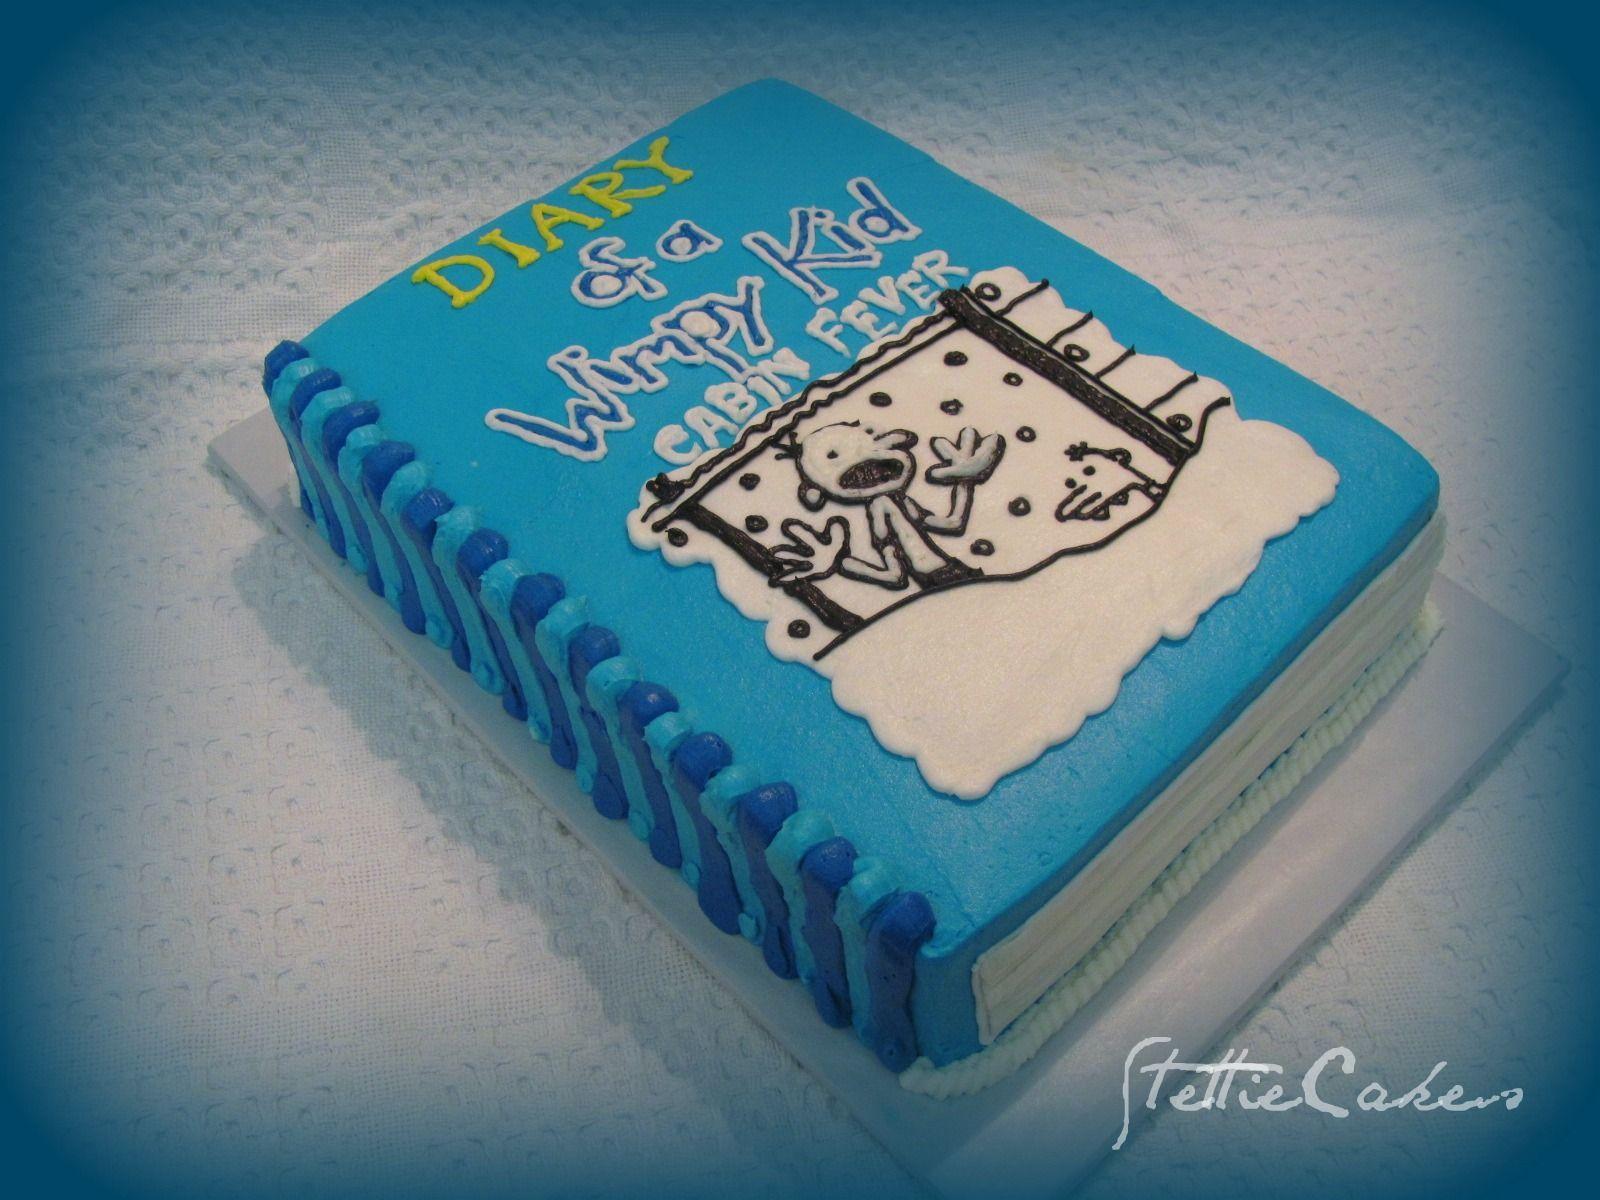 Stettie Cakes: Diary of a Wimpy Kid. party. D, Cakes